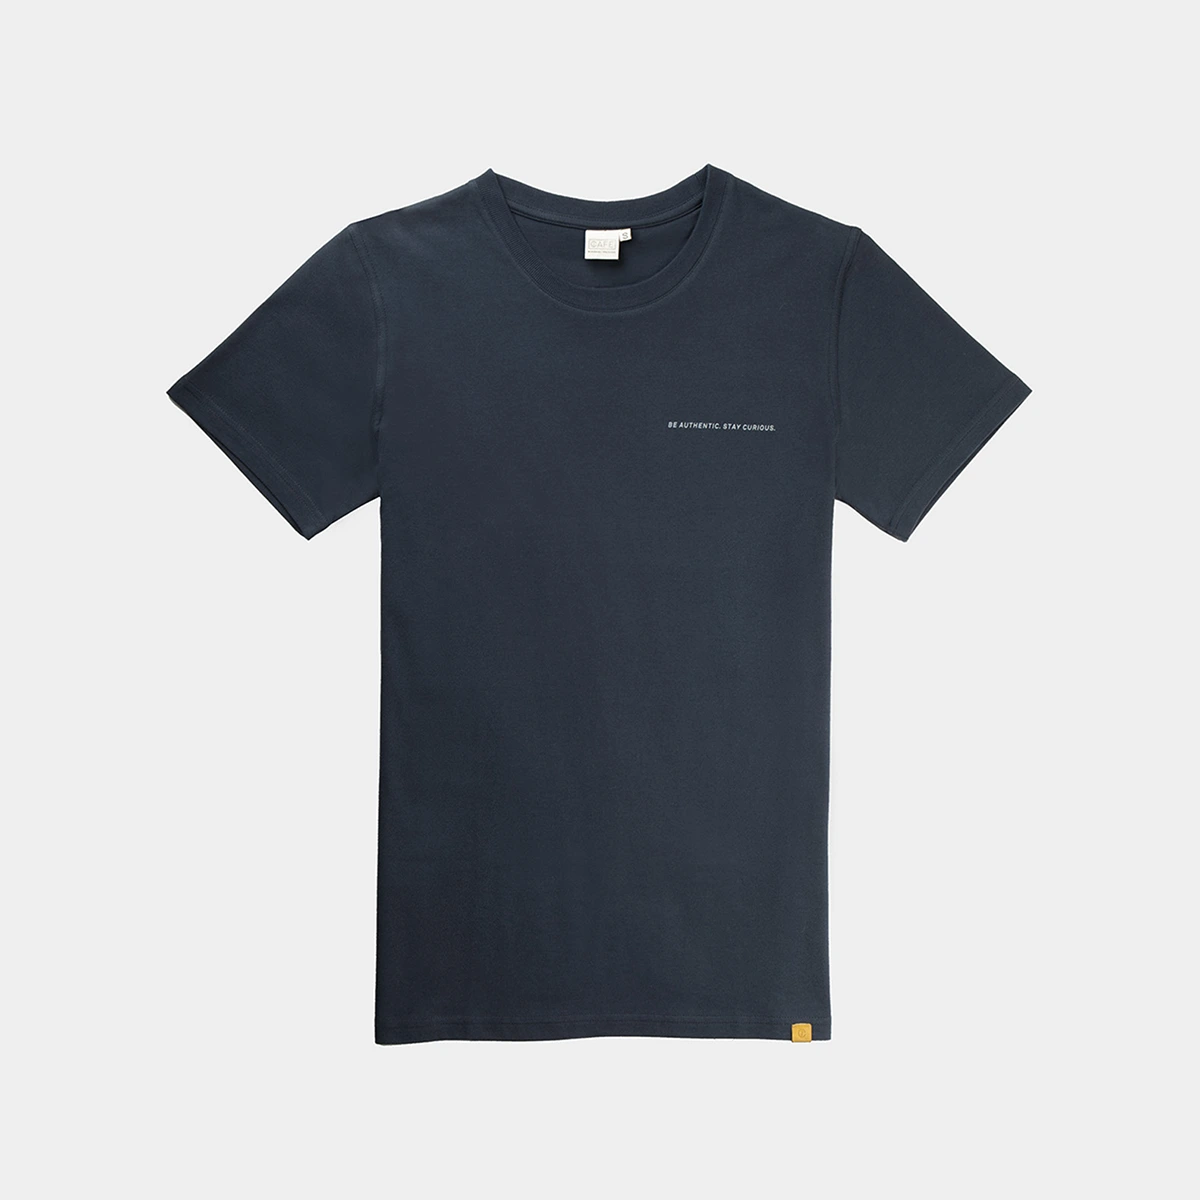 T-shirt in blue navy color made in Portugal with the best organic cotton. Belong to the first textile collection of Café Leather.